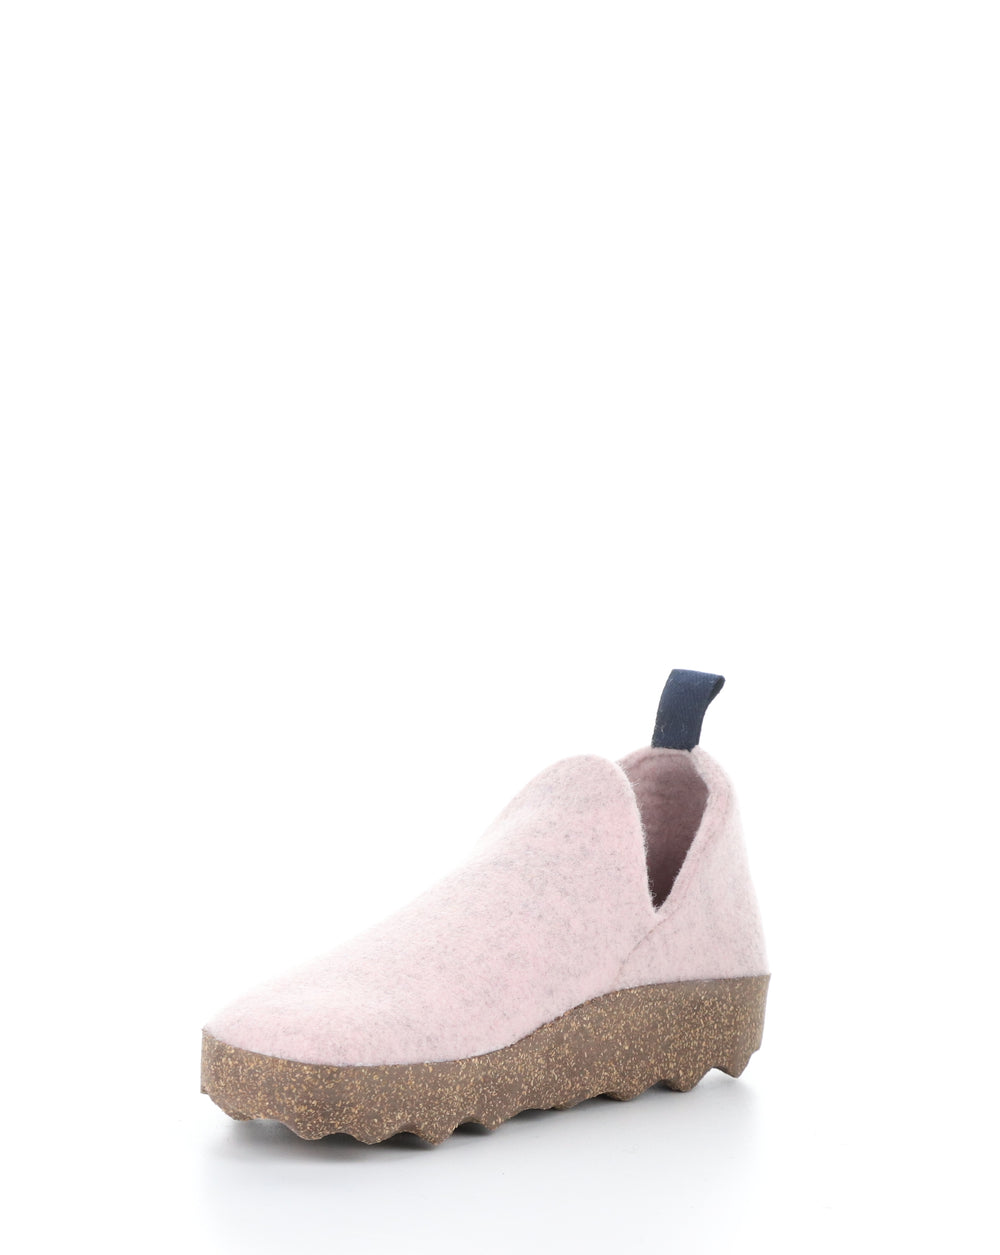 CITY Pink Round Toe Shoes